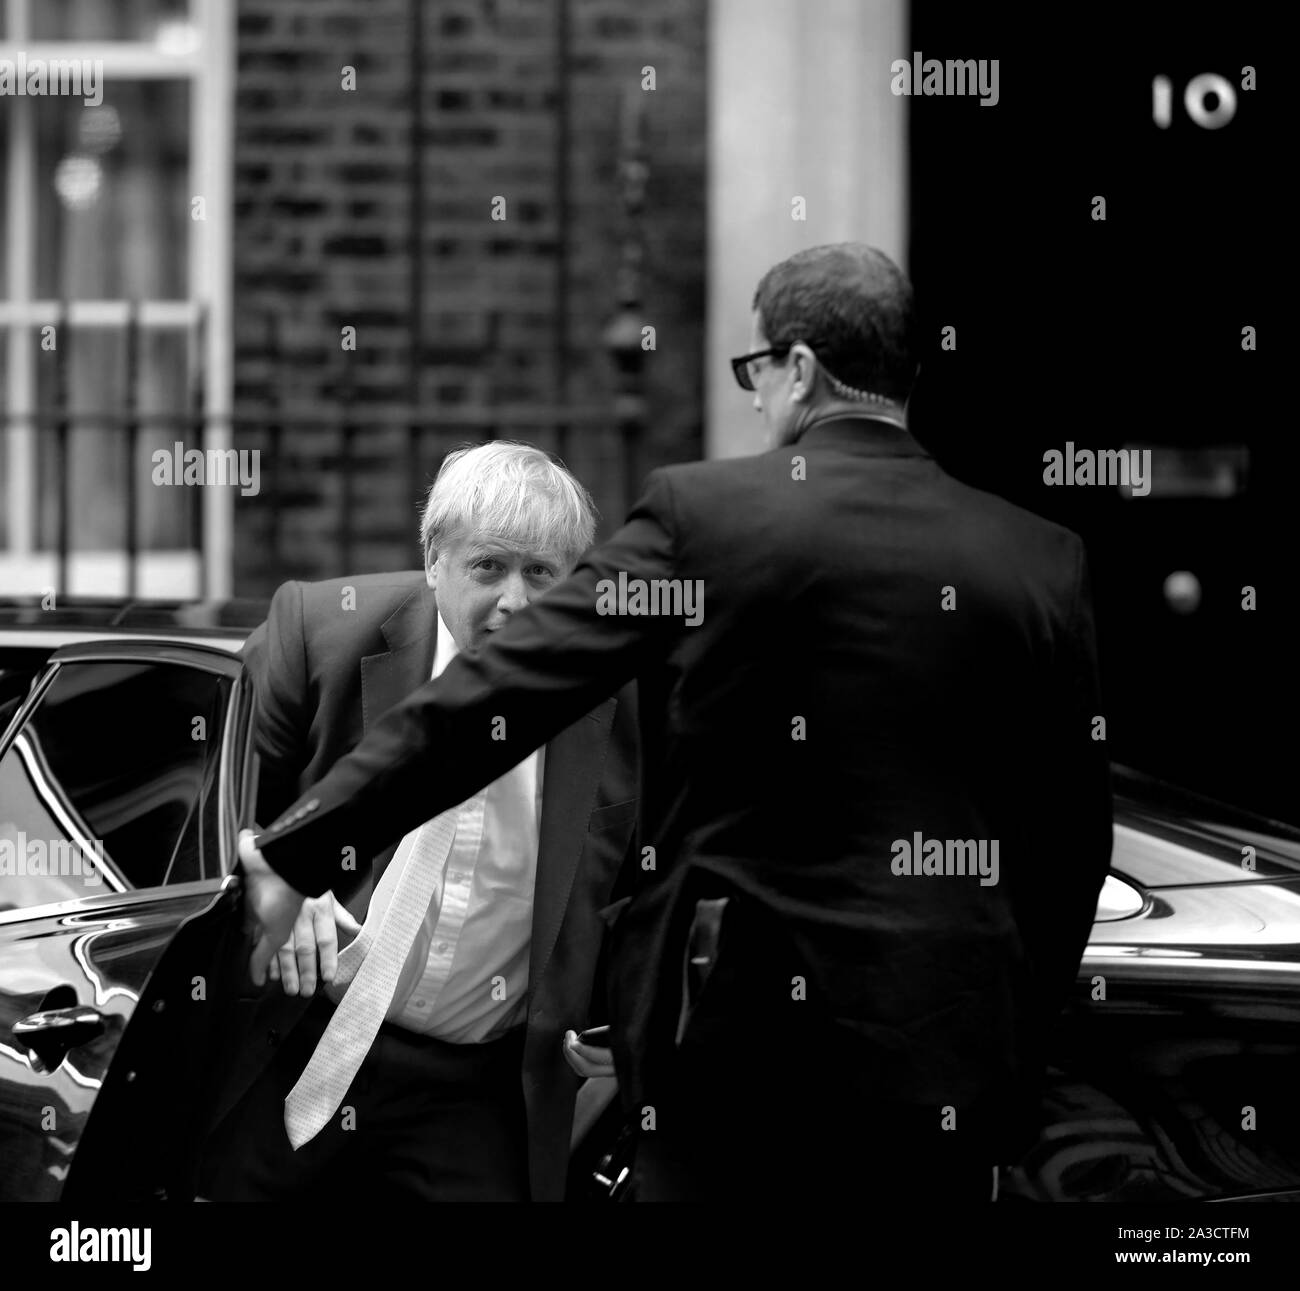 Prime Minister Boris Johnson arrives back in Downing Street after delivering his statement about Brexit negotiations in the House of Commons. London, Stock Photo